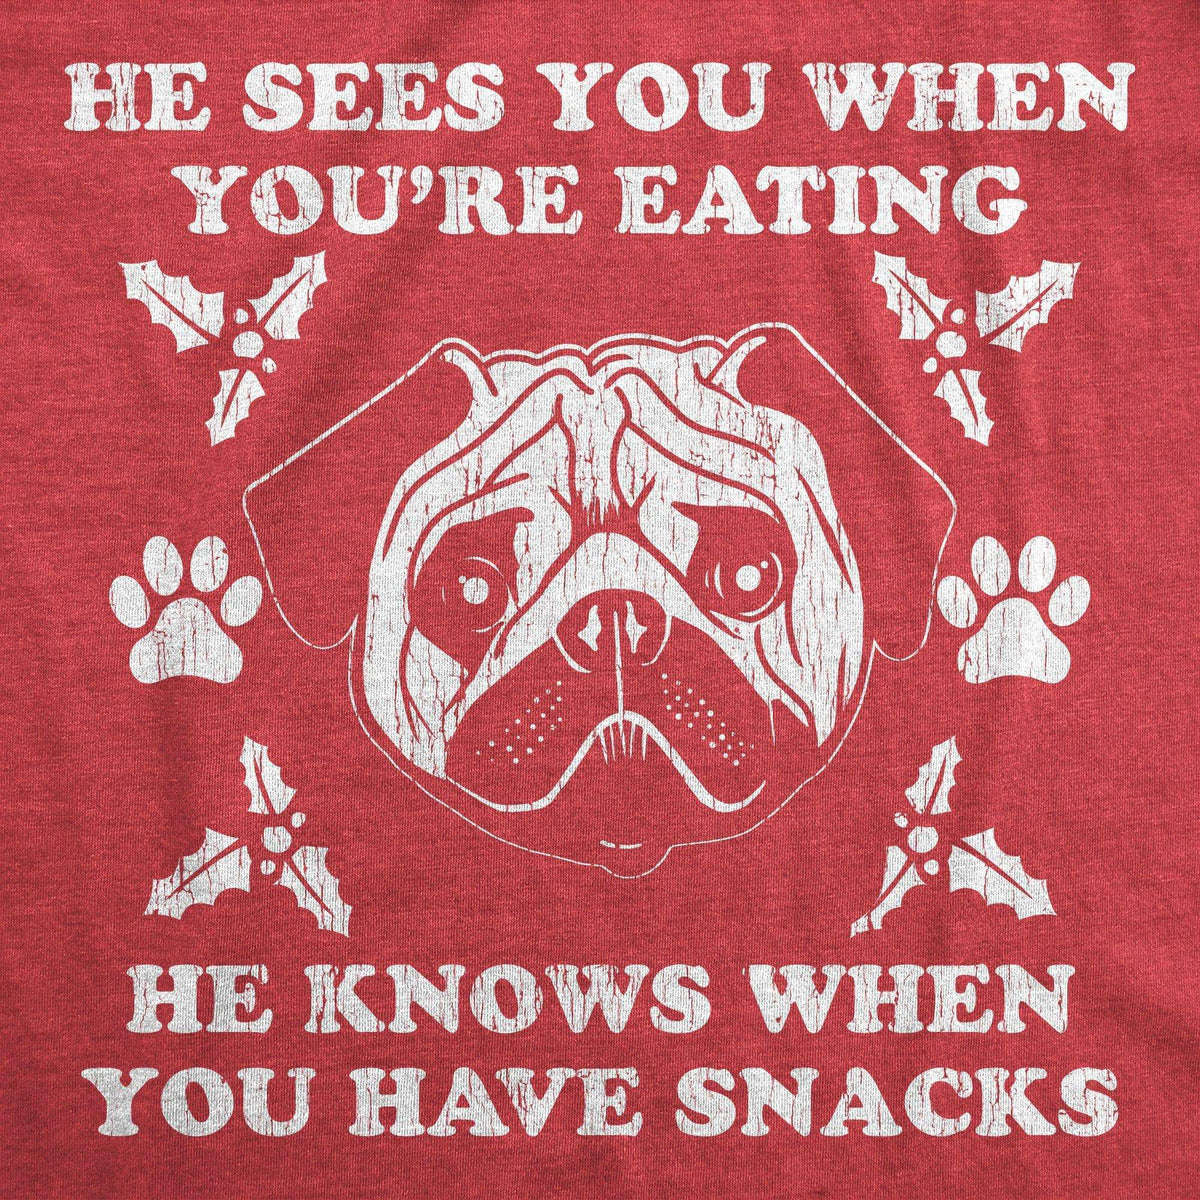 He Sees You When You&#39;re Eating Men&#39;s Tshirt - Crazy Dog T-Shirts